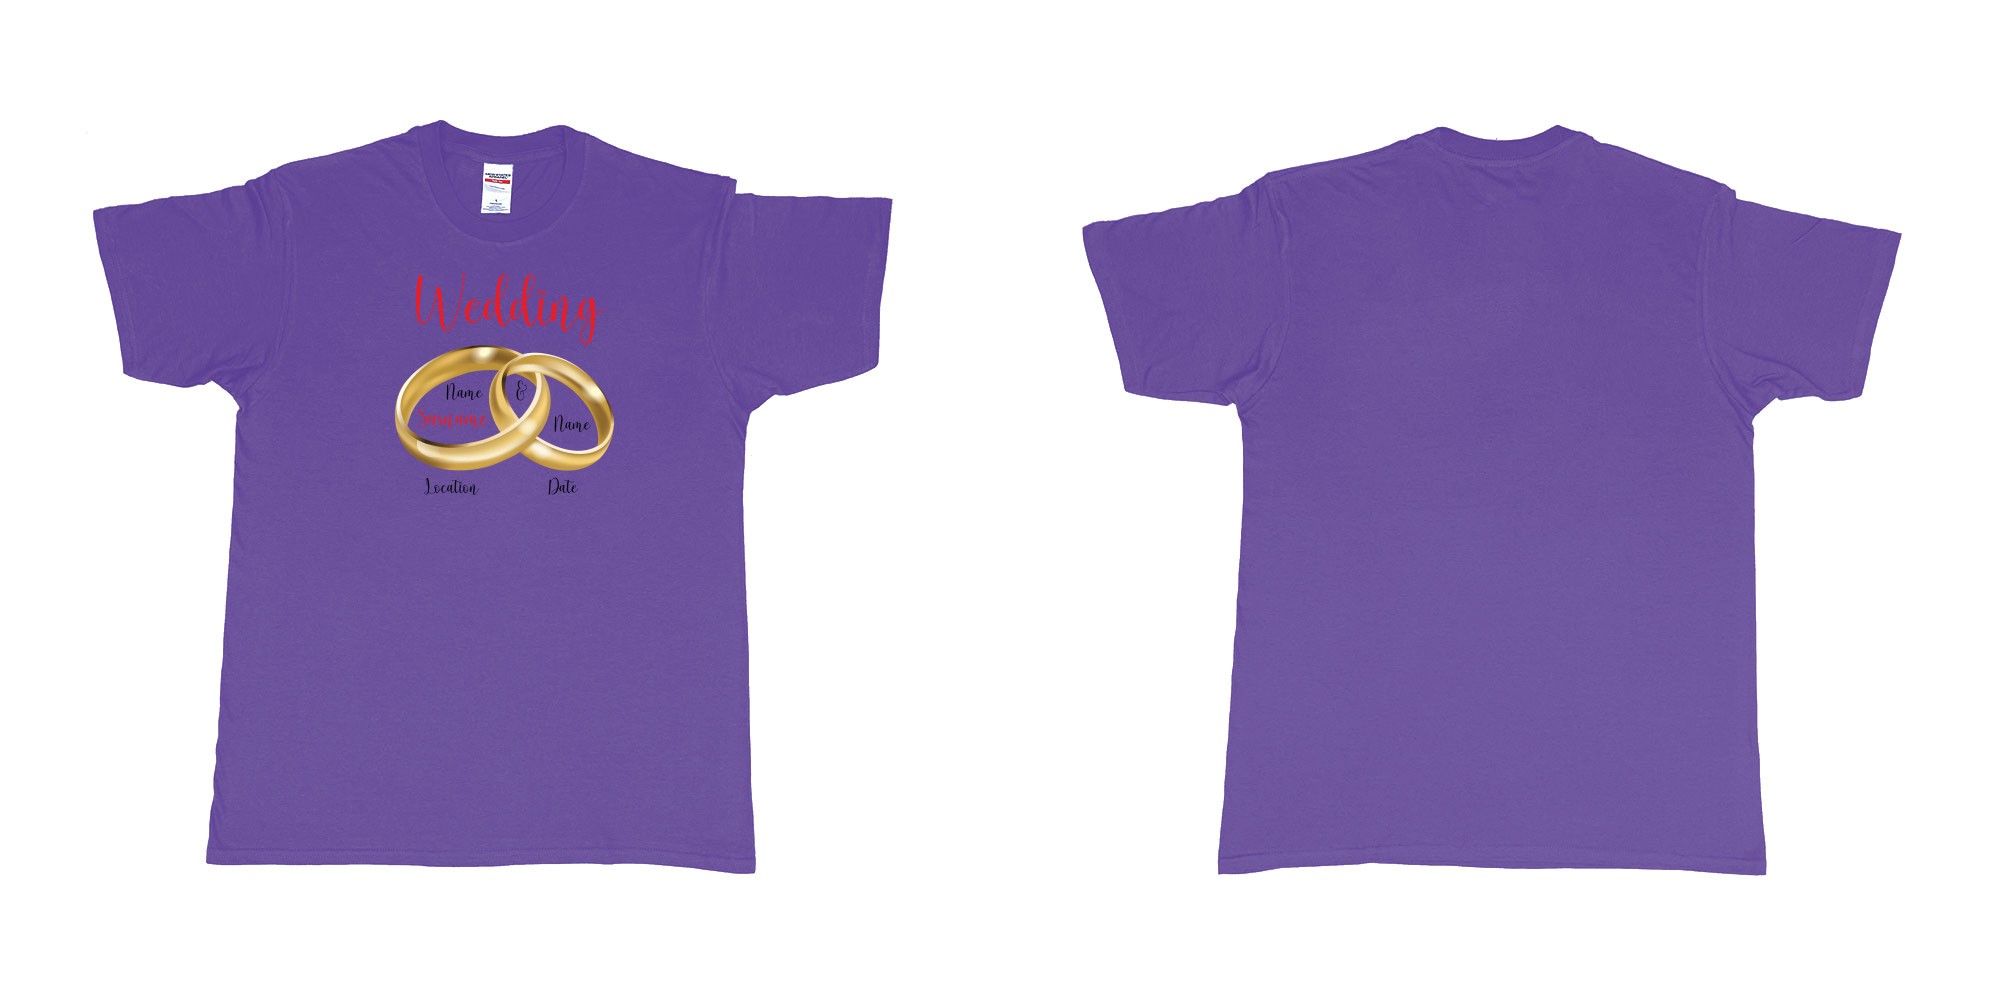 Custom tshirt design wedding rings in fabric color purple choice your own text made in Bali by The Pirate Way